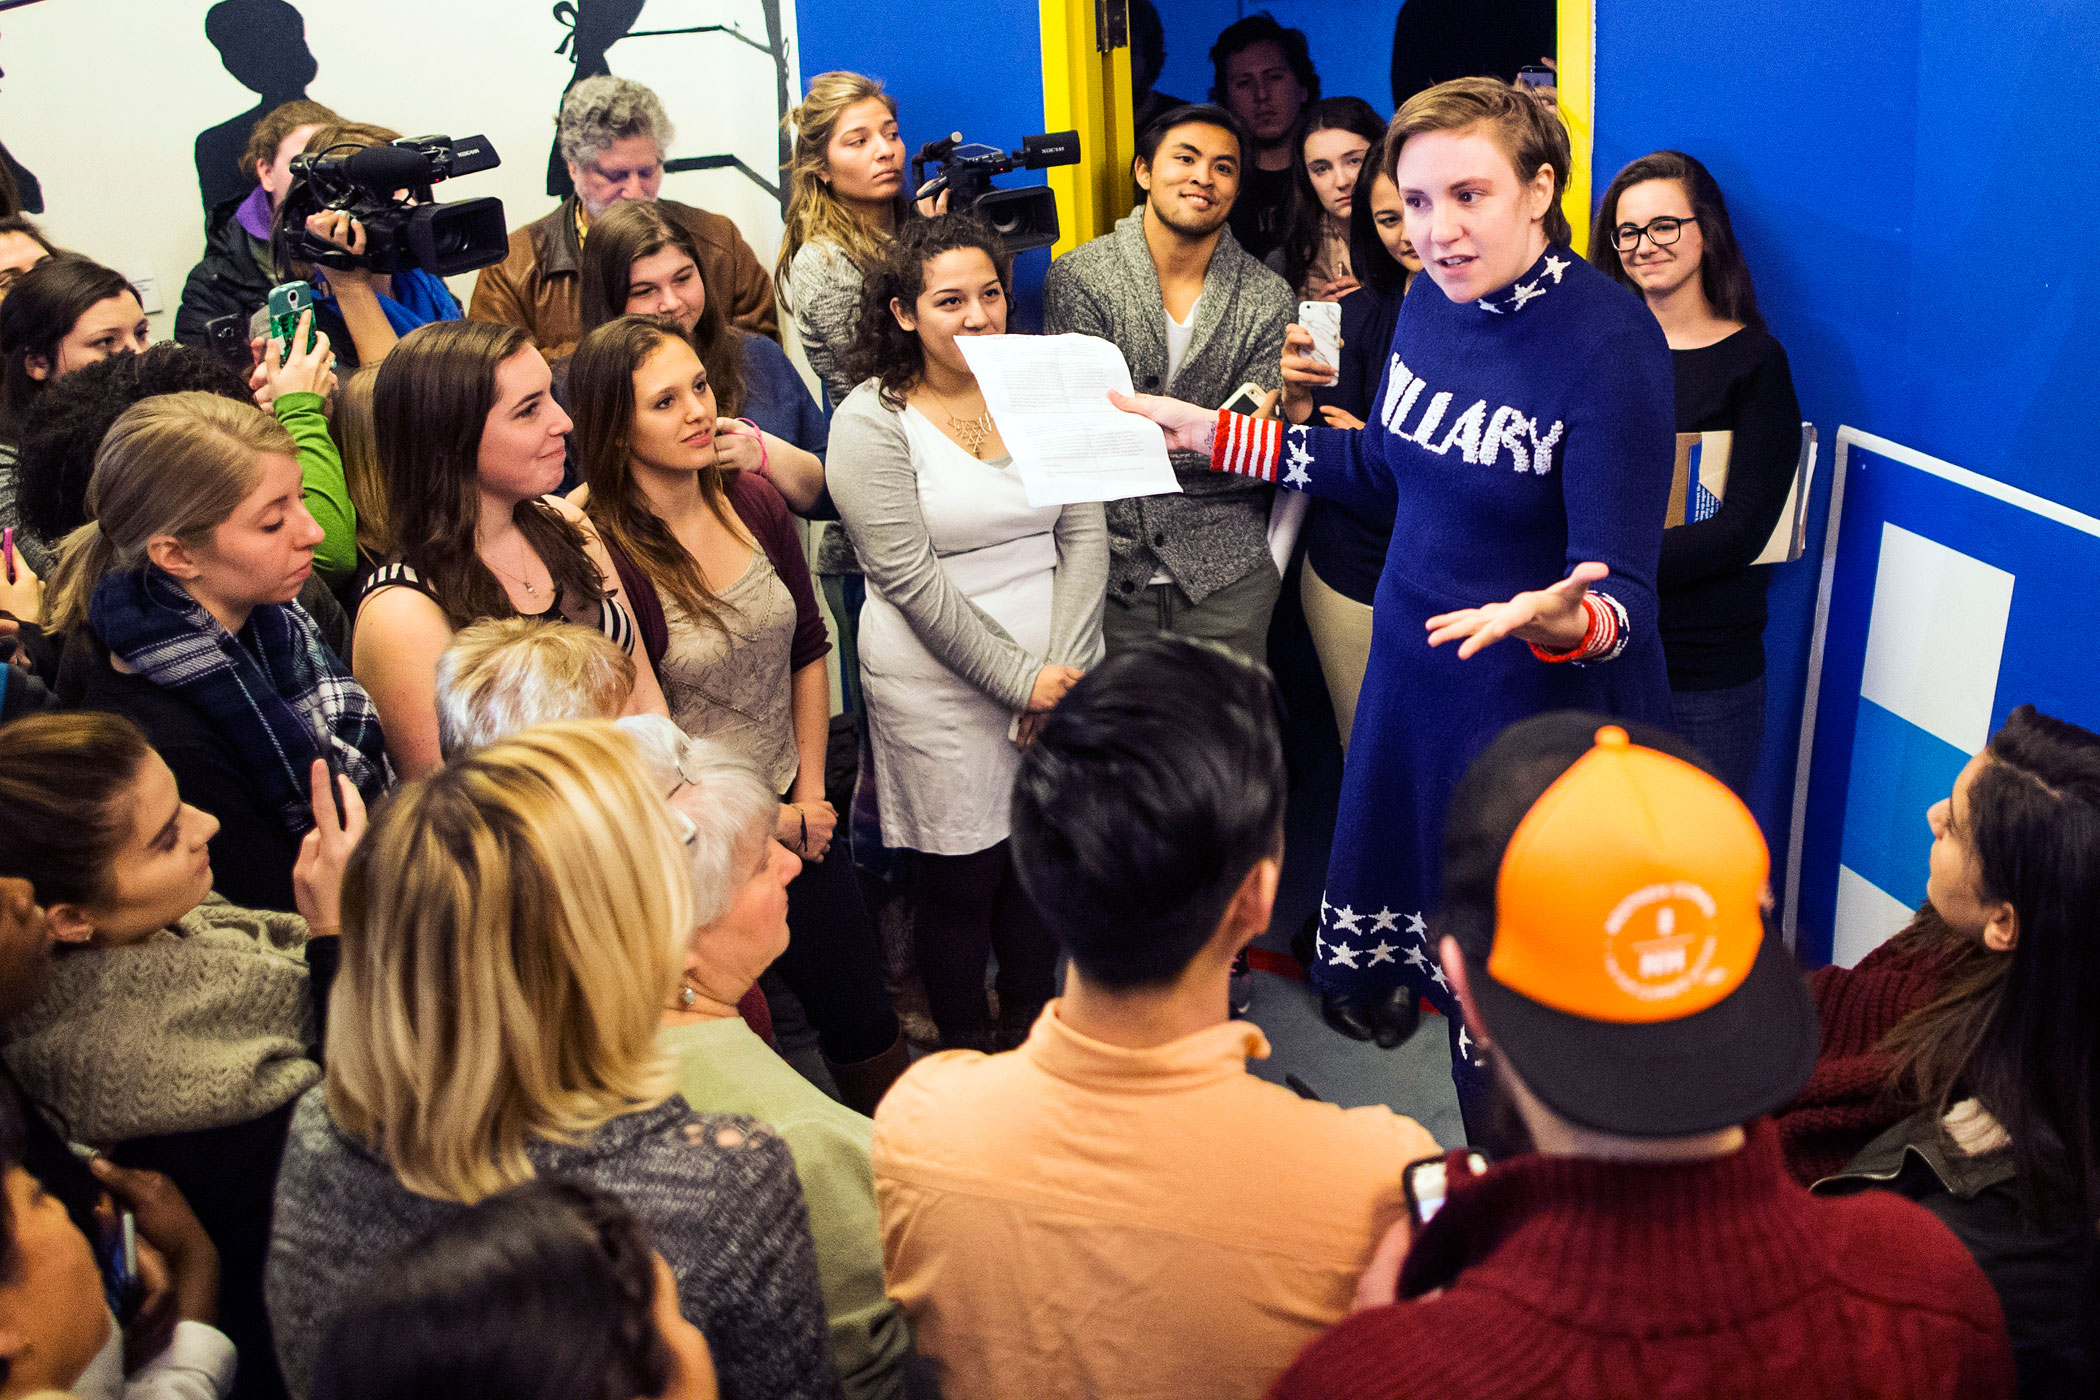 Screenwriter and actress Lena Dunham supports Democratic presidential candidate Hillary Clinton. Here she speaks at a Hillary Clinton campaign office on Jan. 8, 2016 in Manchester, N.H.